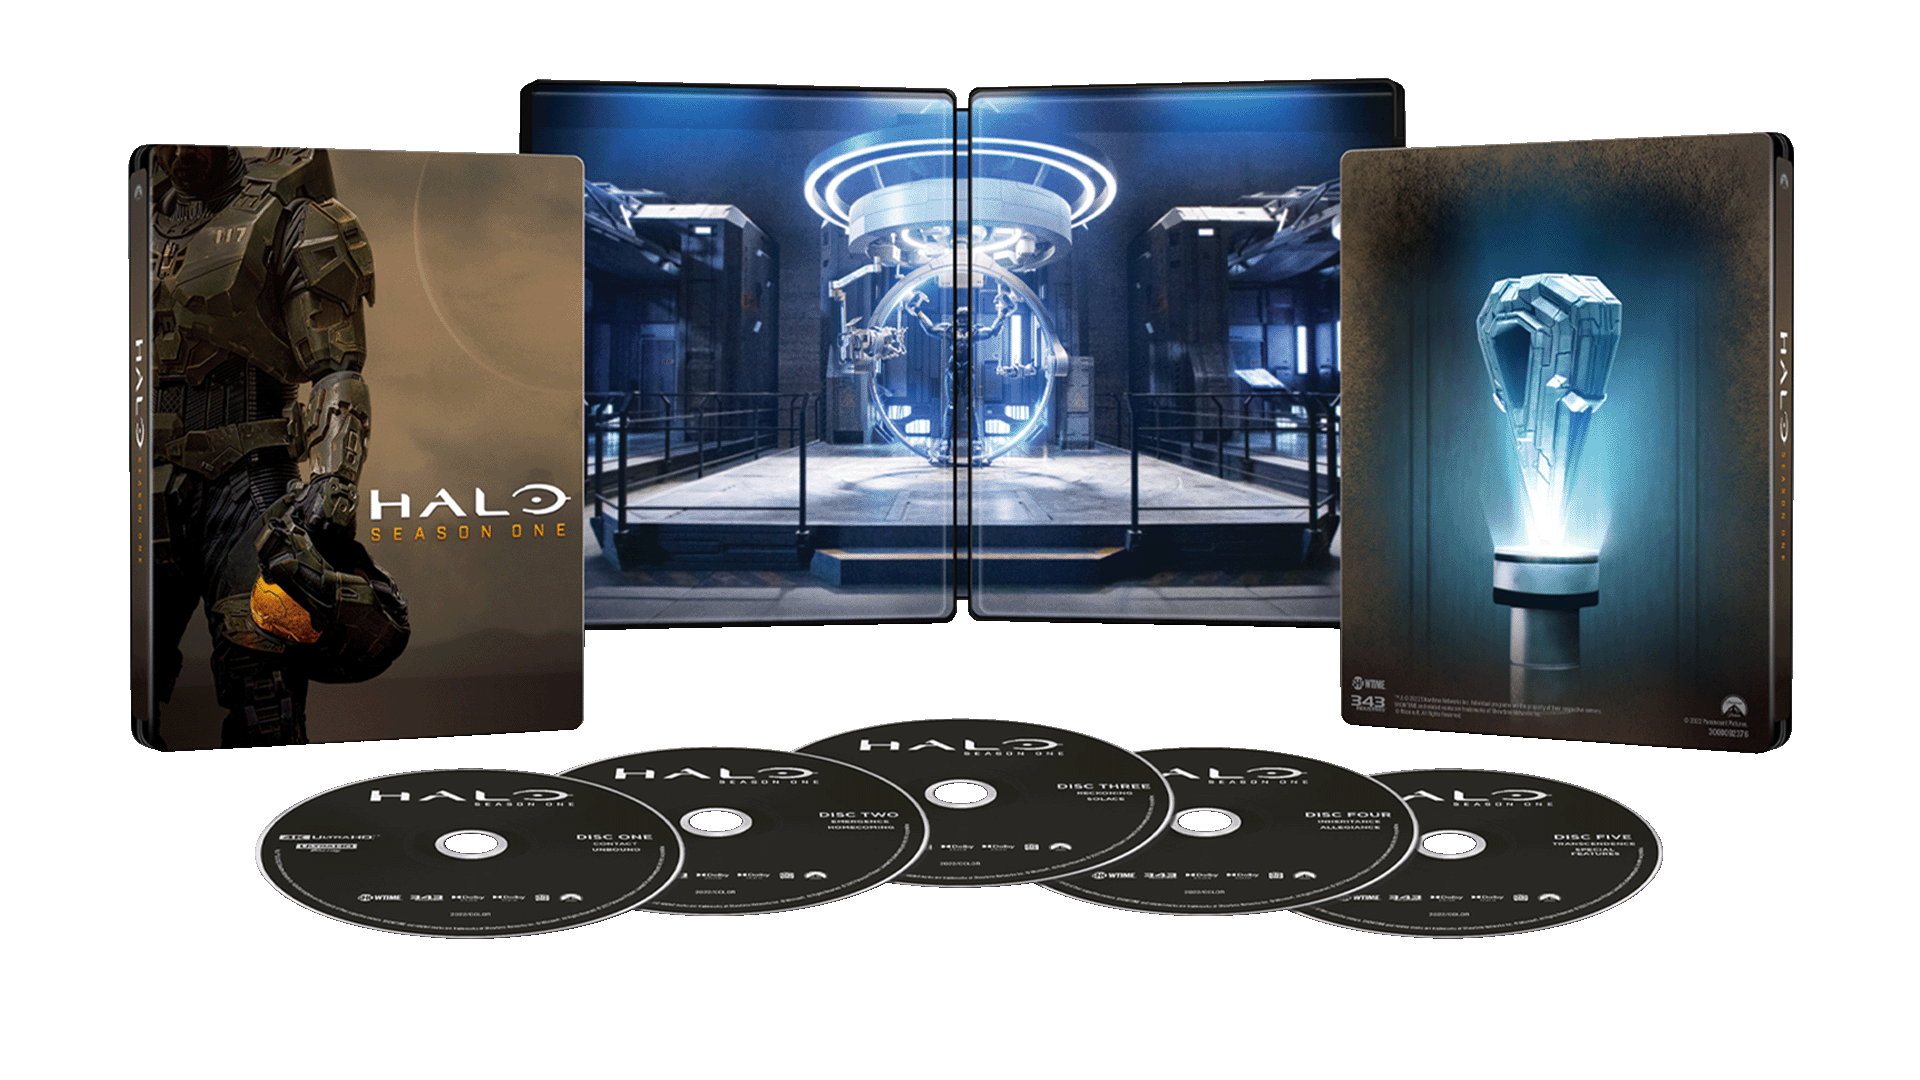 Image of Halo The Series steelbook